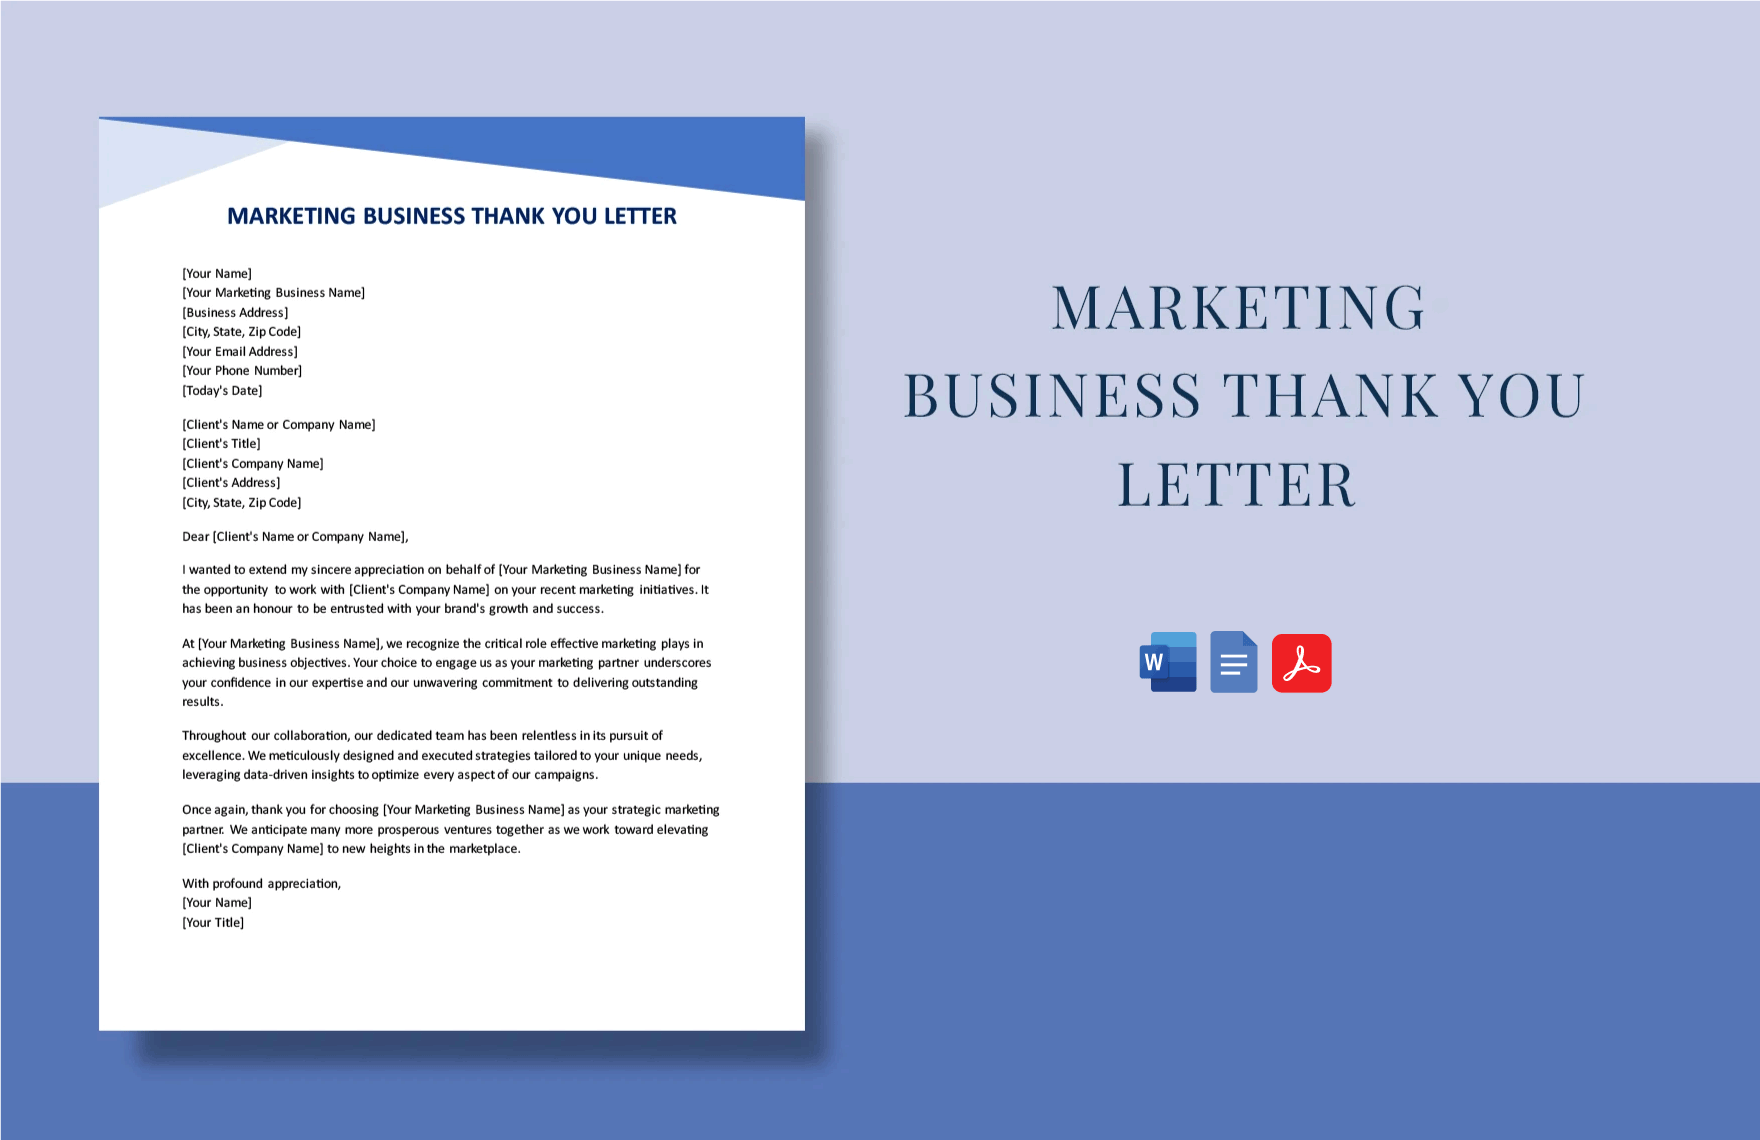 Marketing Business Thank You Letter Template in Word, Google Docs, PDF